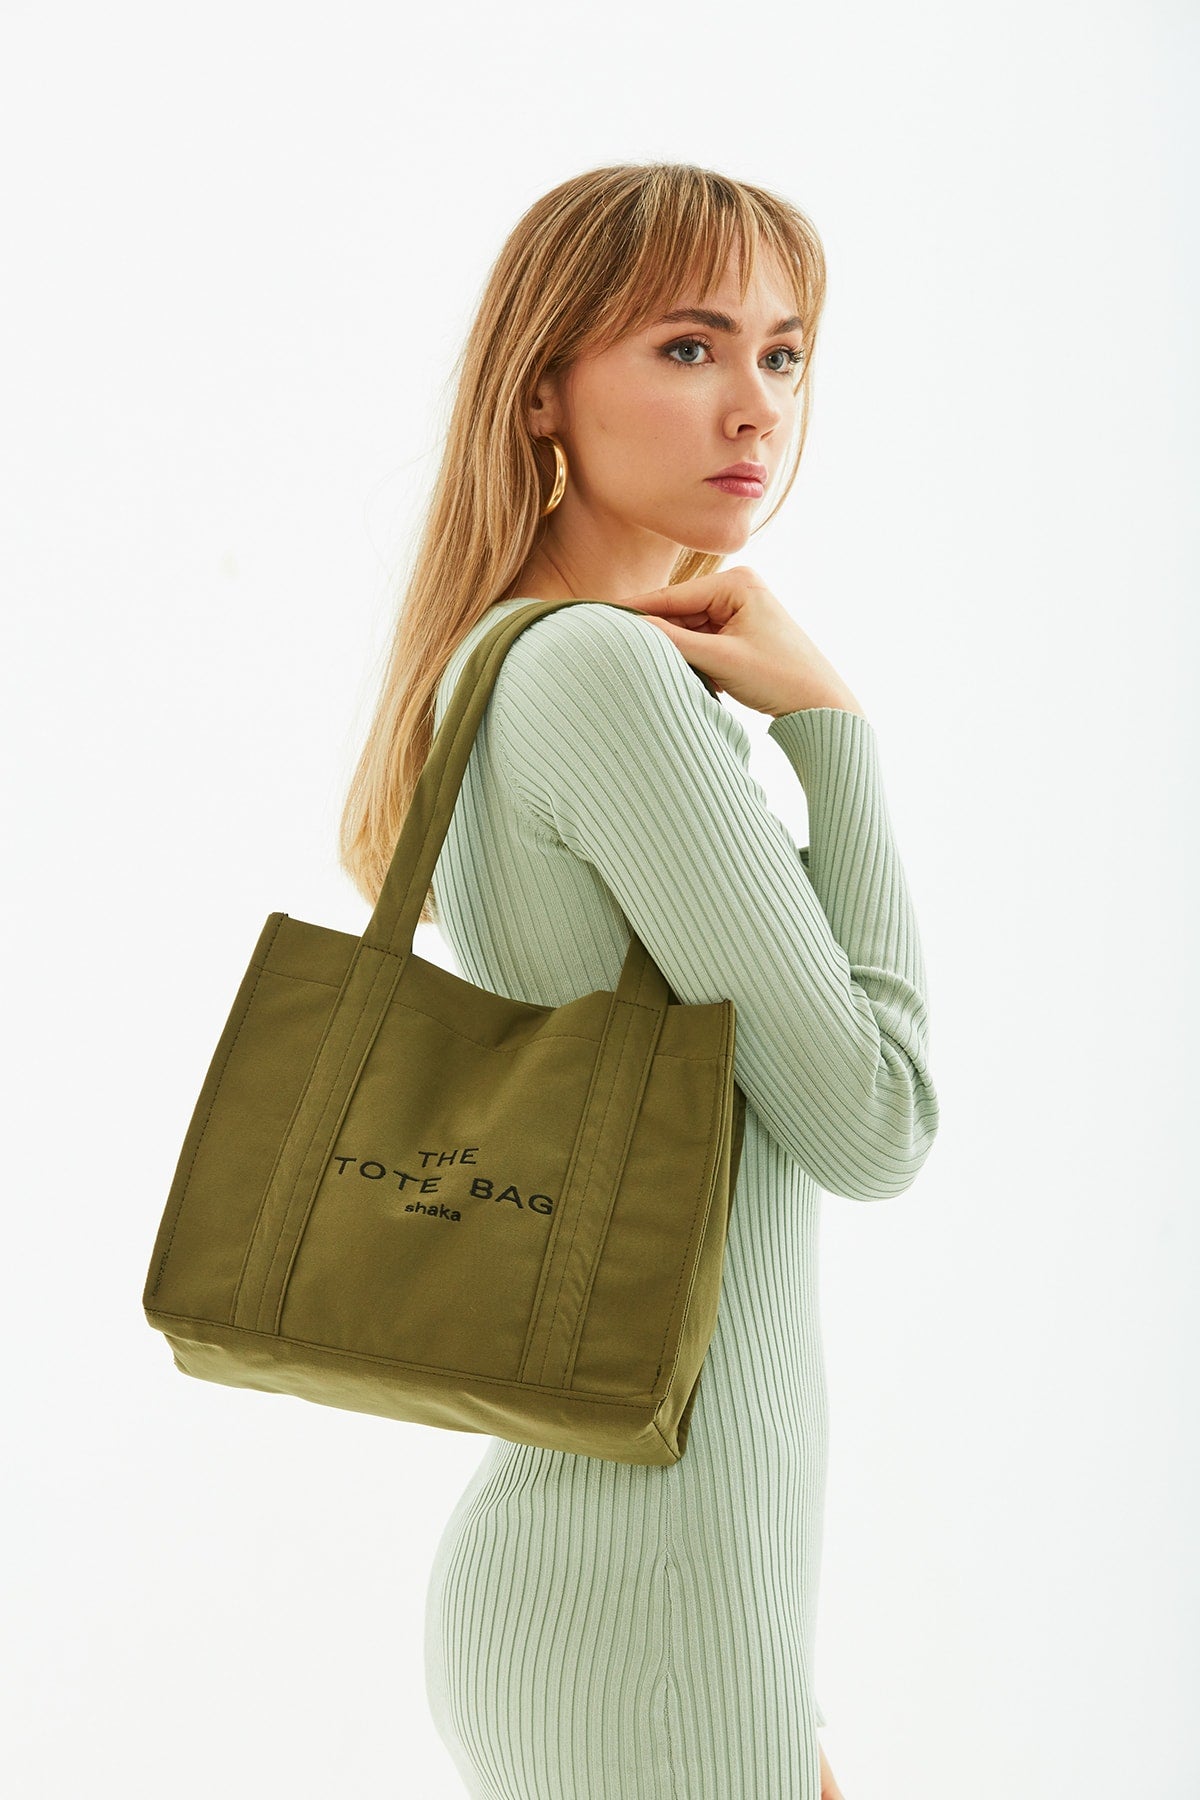 Khaki Green U45 Snap Closure The Tote Bag Embroidered Canvas Fabric Casual Women's Arm And Shoulder Bag